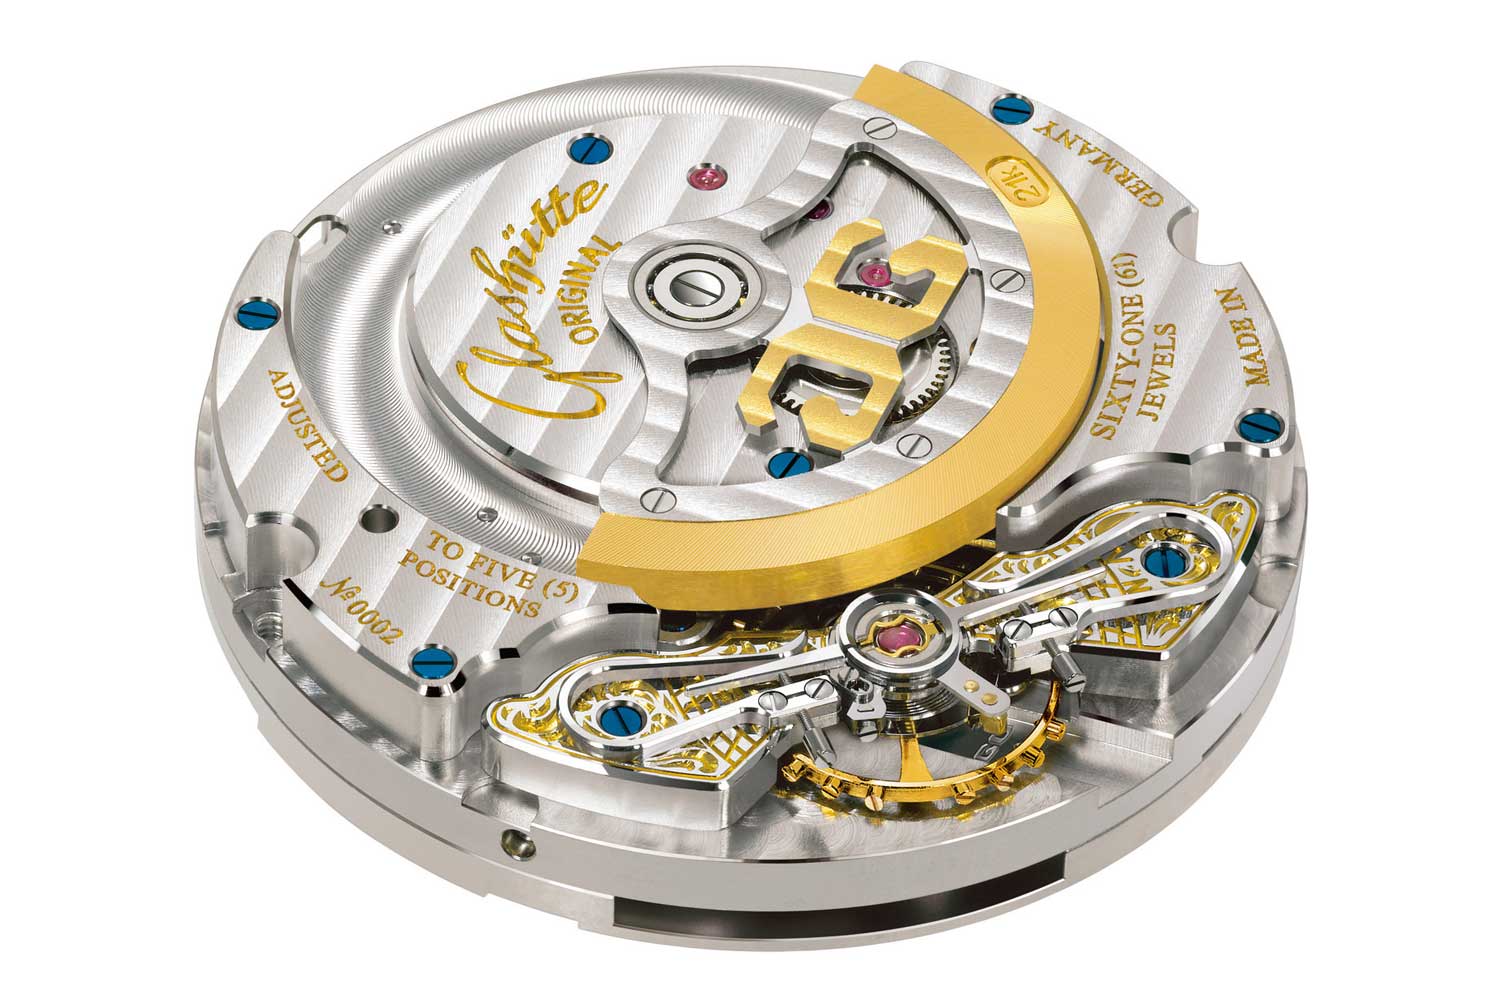 The in-house automatic movement 90-02 features a rotor with a double G Logo and delivers a power reserve of 42 hours